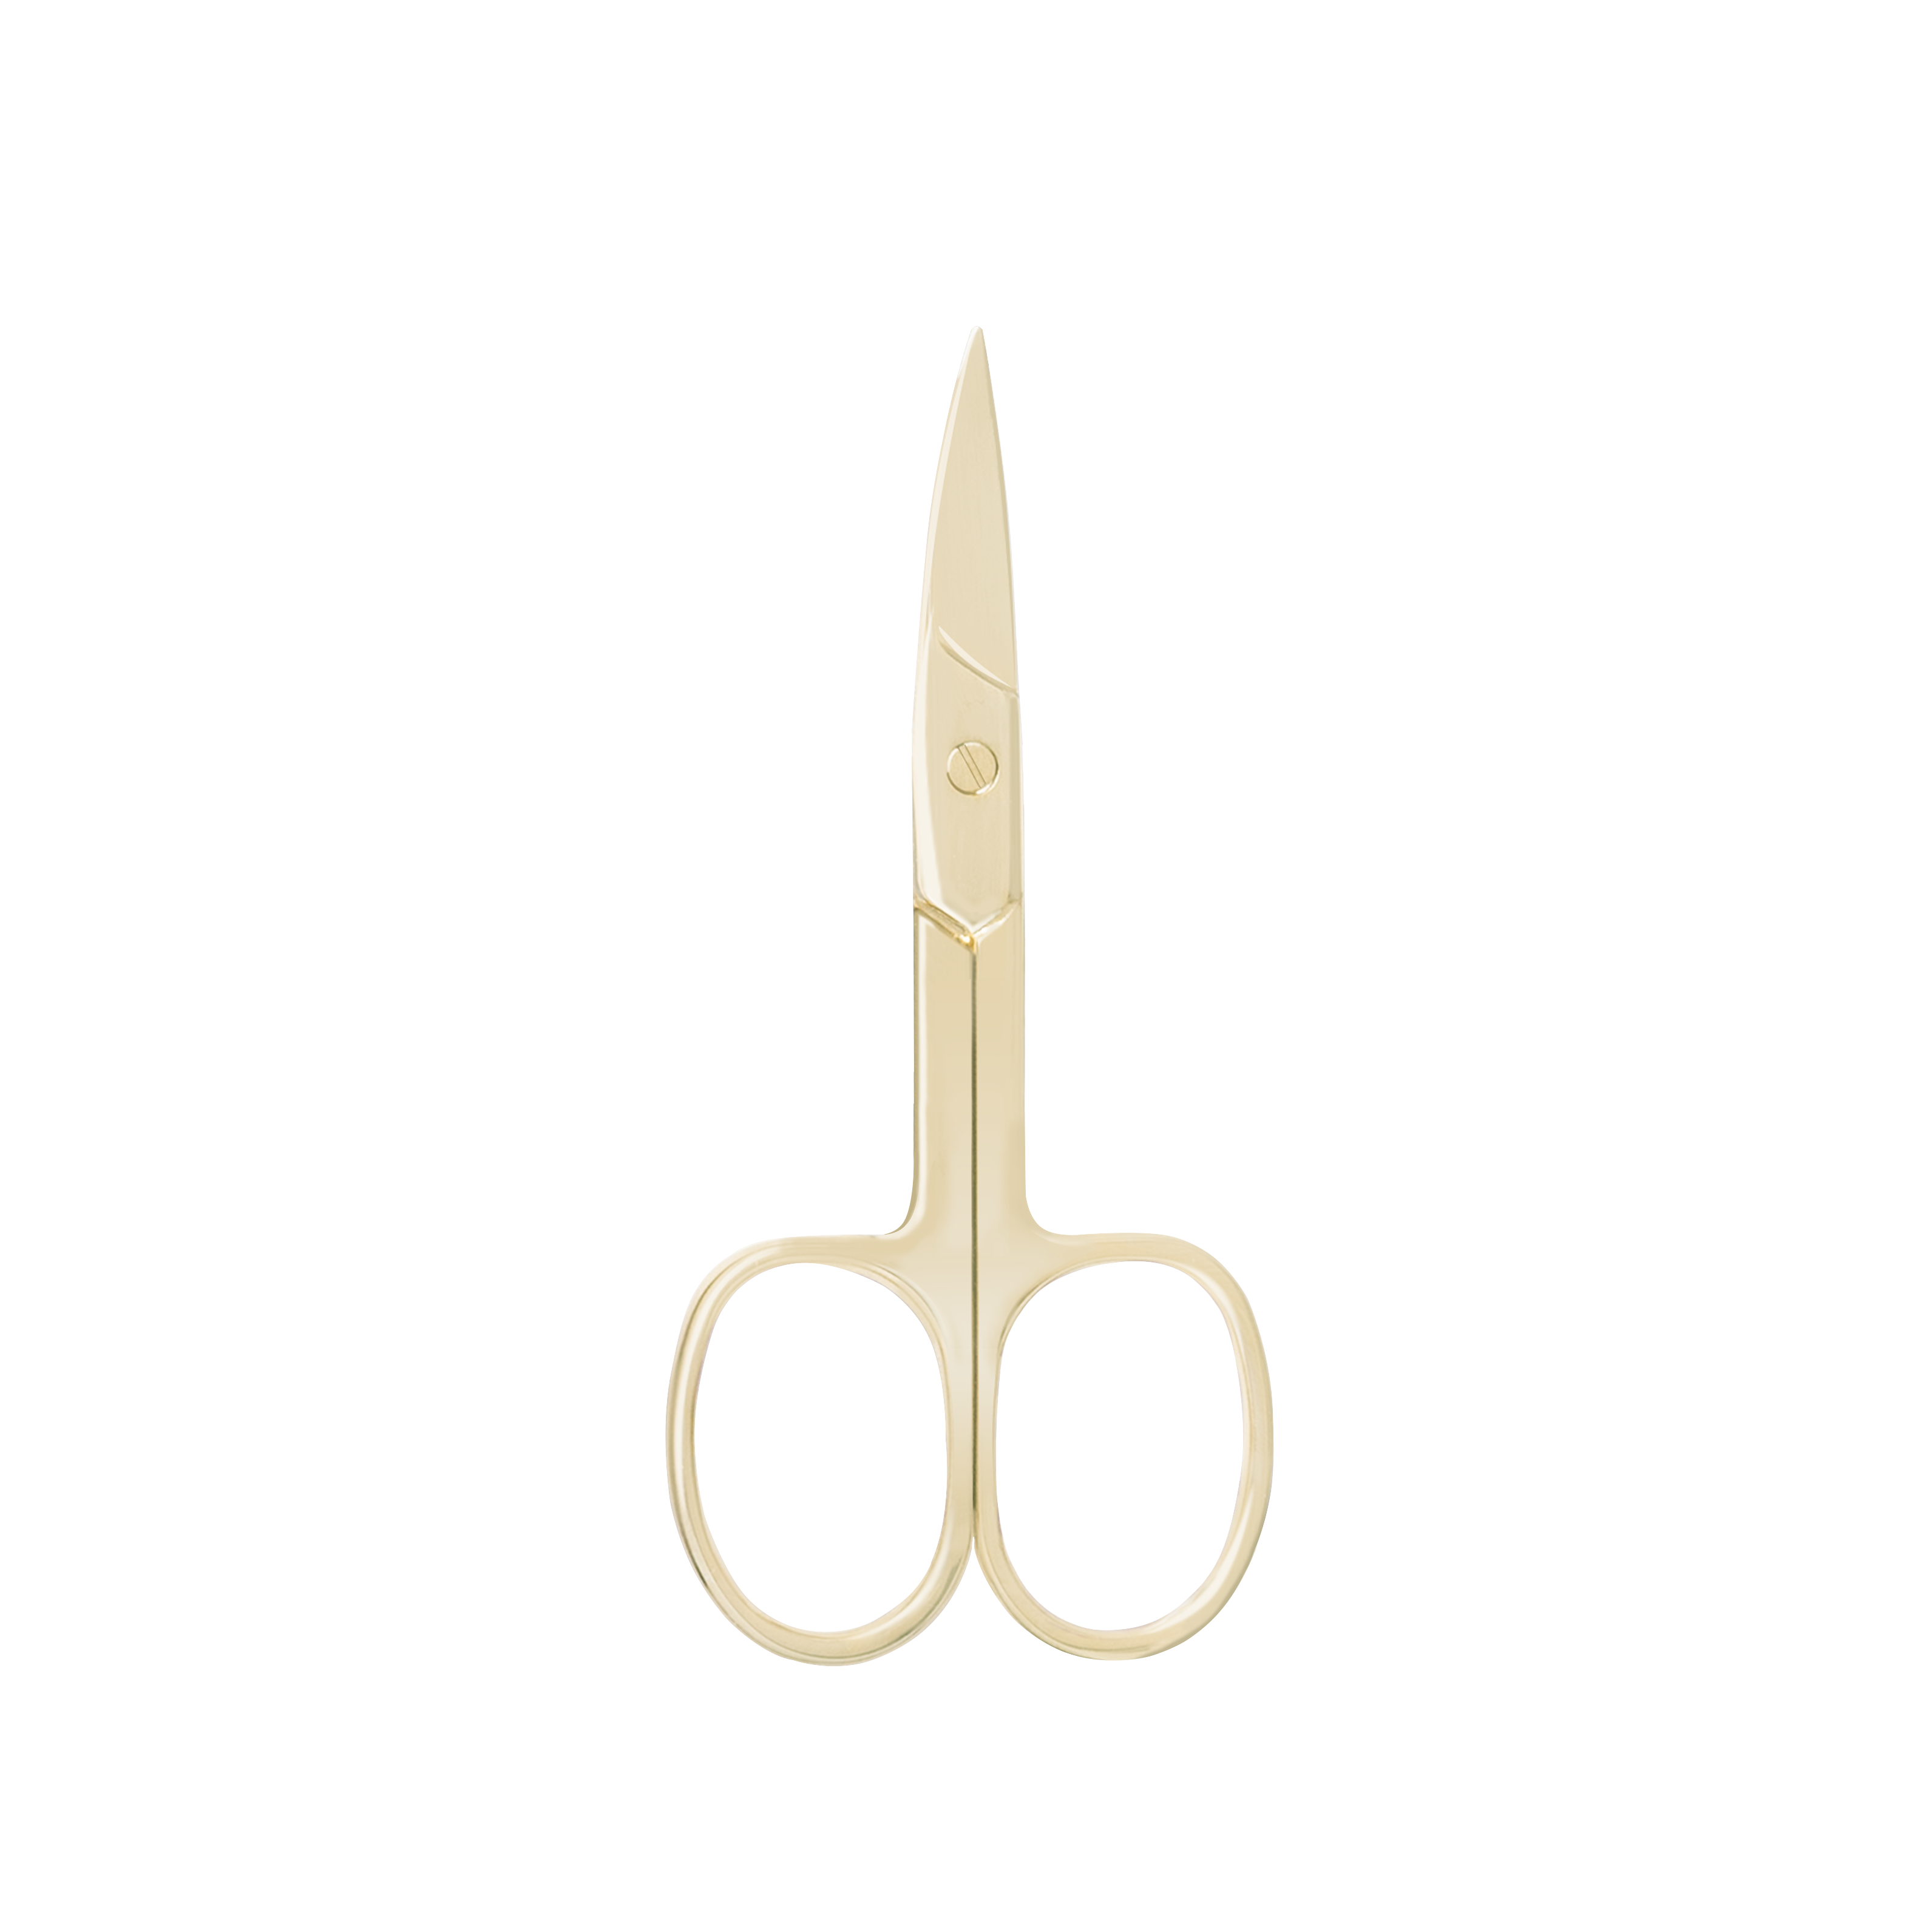 LAJA IMPORTS FINE POINT CURVED TIP NAIL SCISSORS STAINLESS STEEL (HALF GOLD)